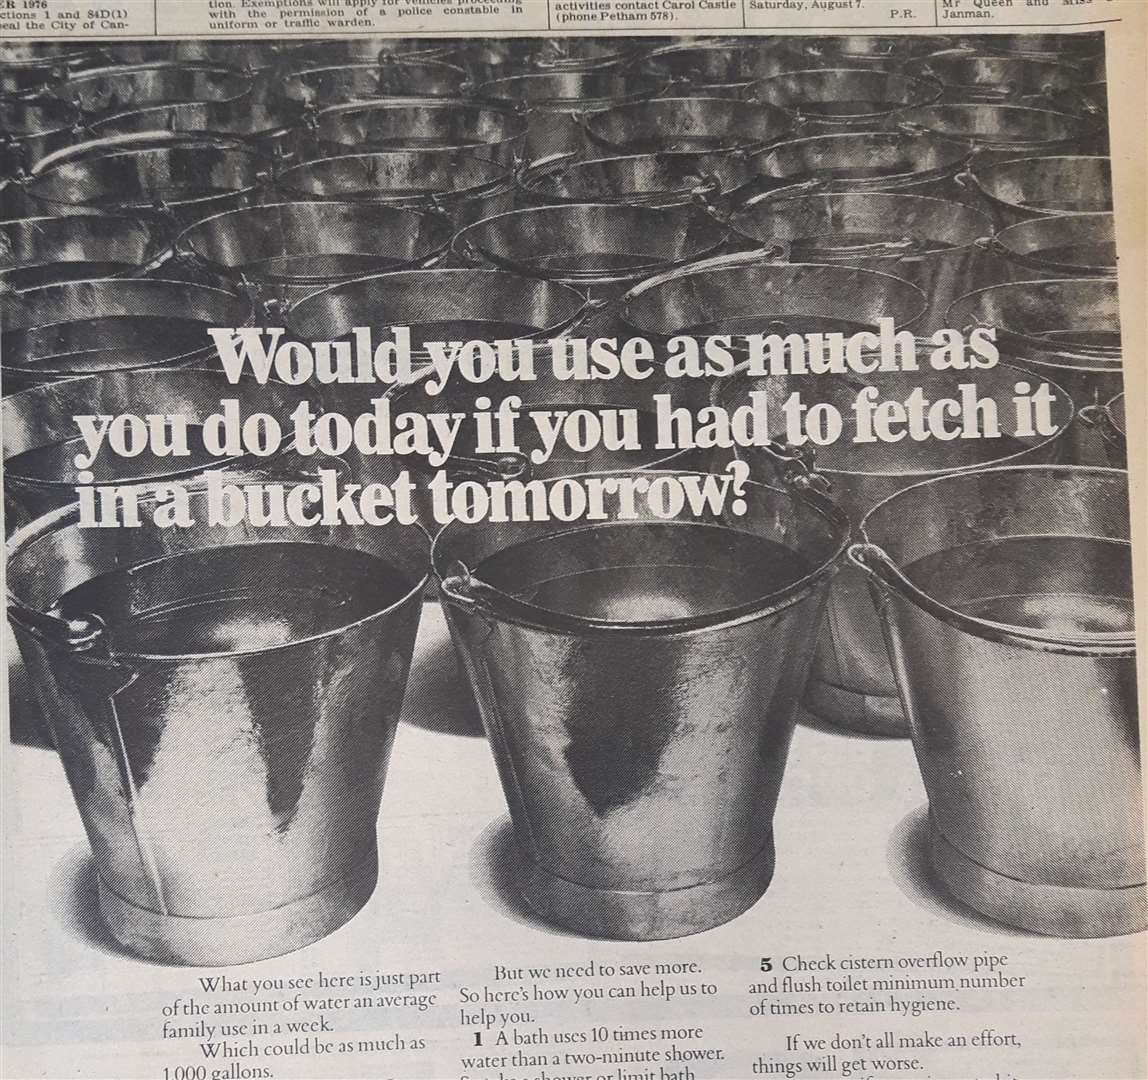 'Would you use as much as you do if you had to fetch it in a bucket' asks one newspaper advert appealing for people to save water